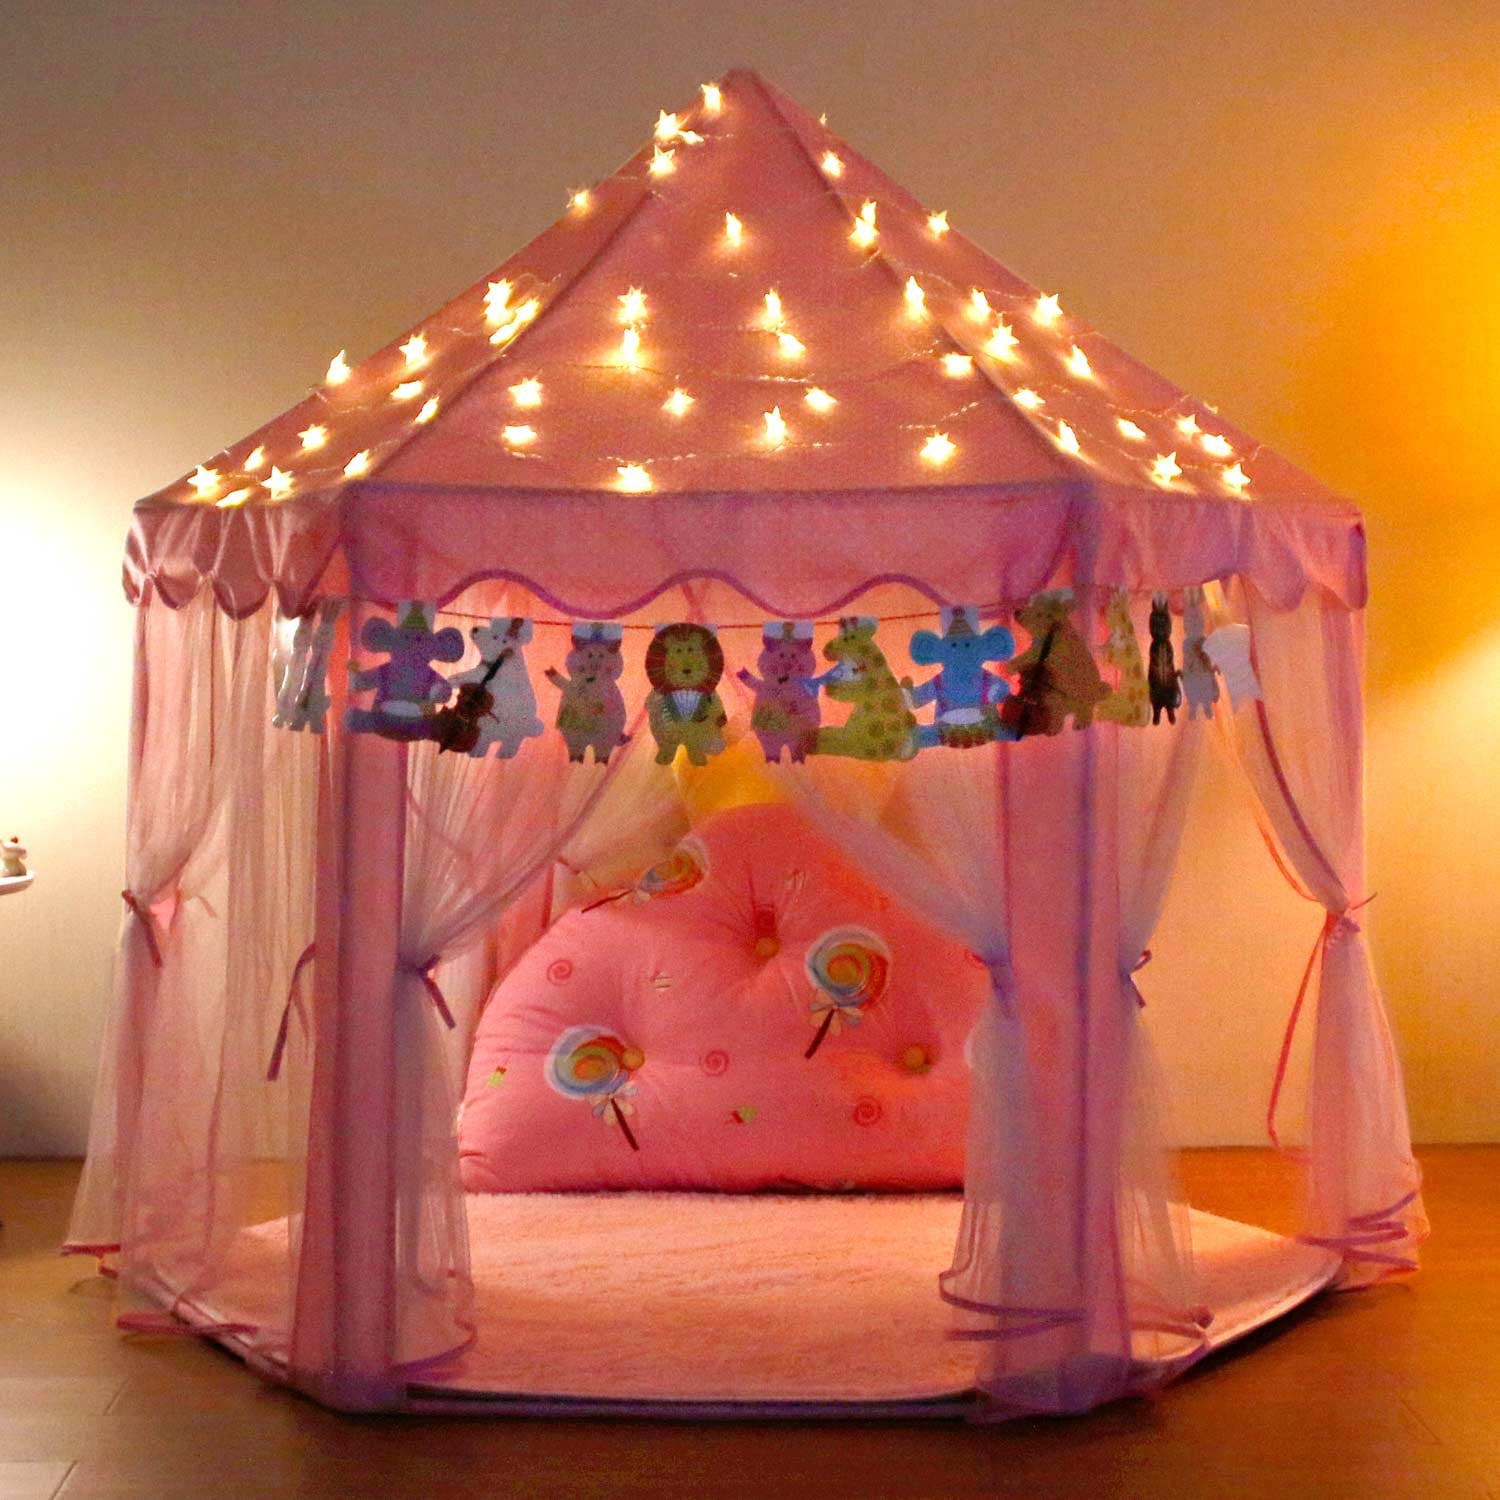 Princess Castle Play Tents for kids with Star Lights Indoor Outdoor Gifts Age 3+ 